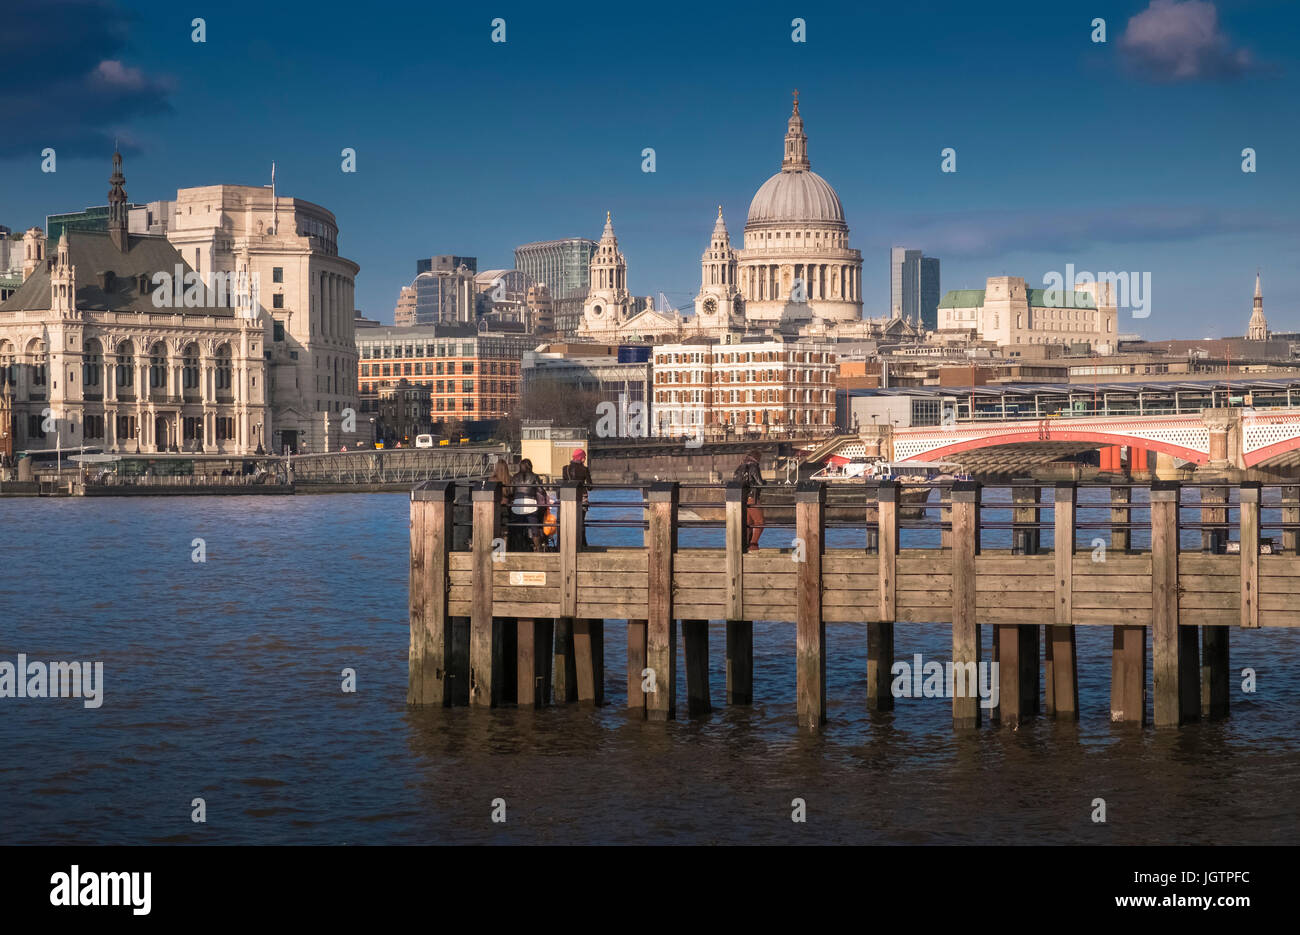 London skyline, with iconic dome of St Pauls Cathedral in the background, London, England, UK Stock Photo